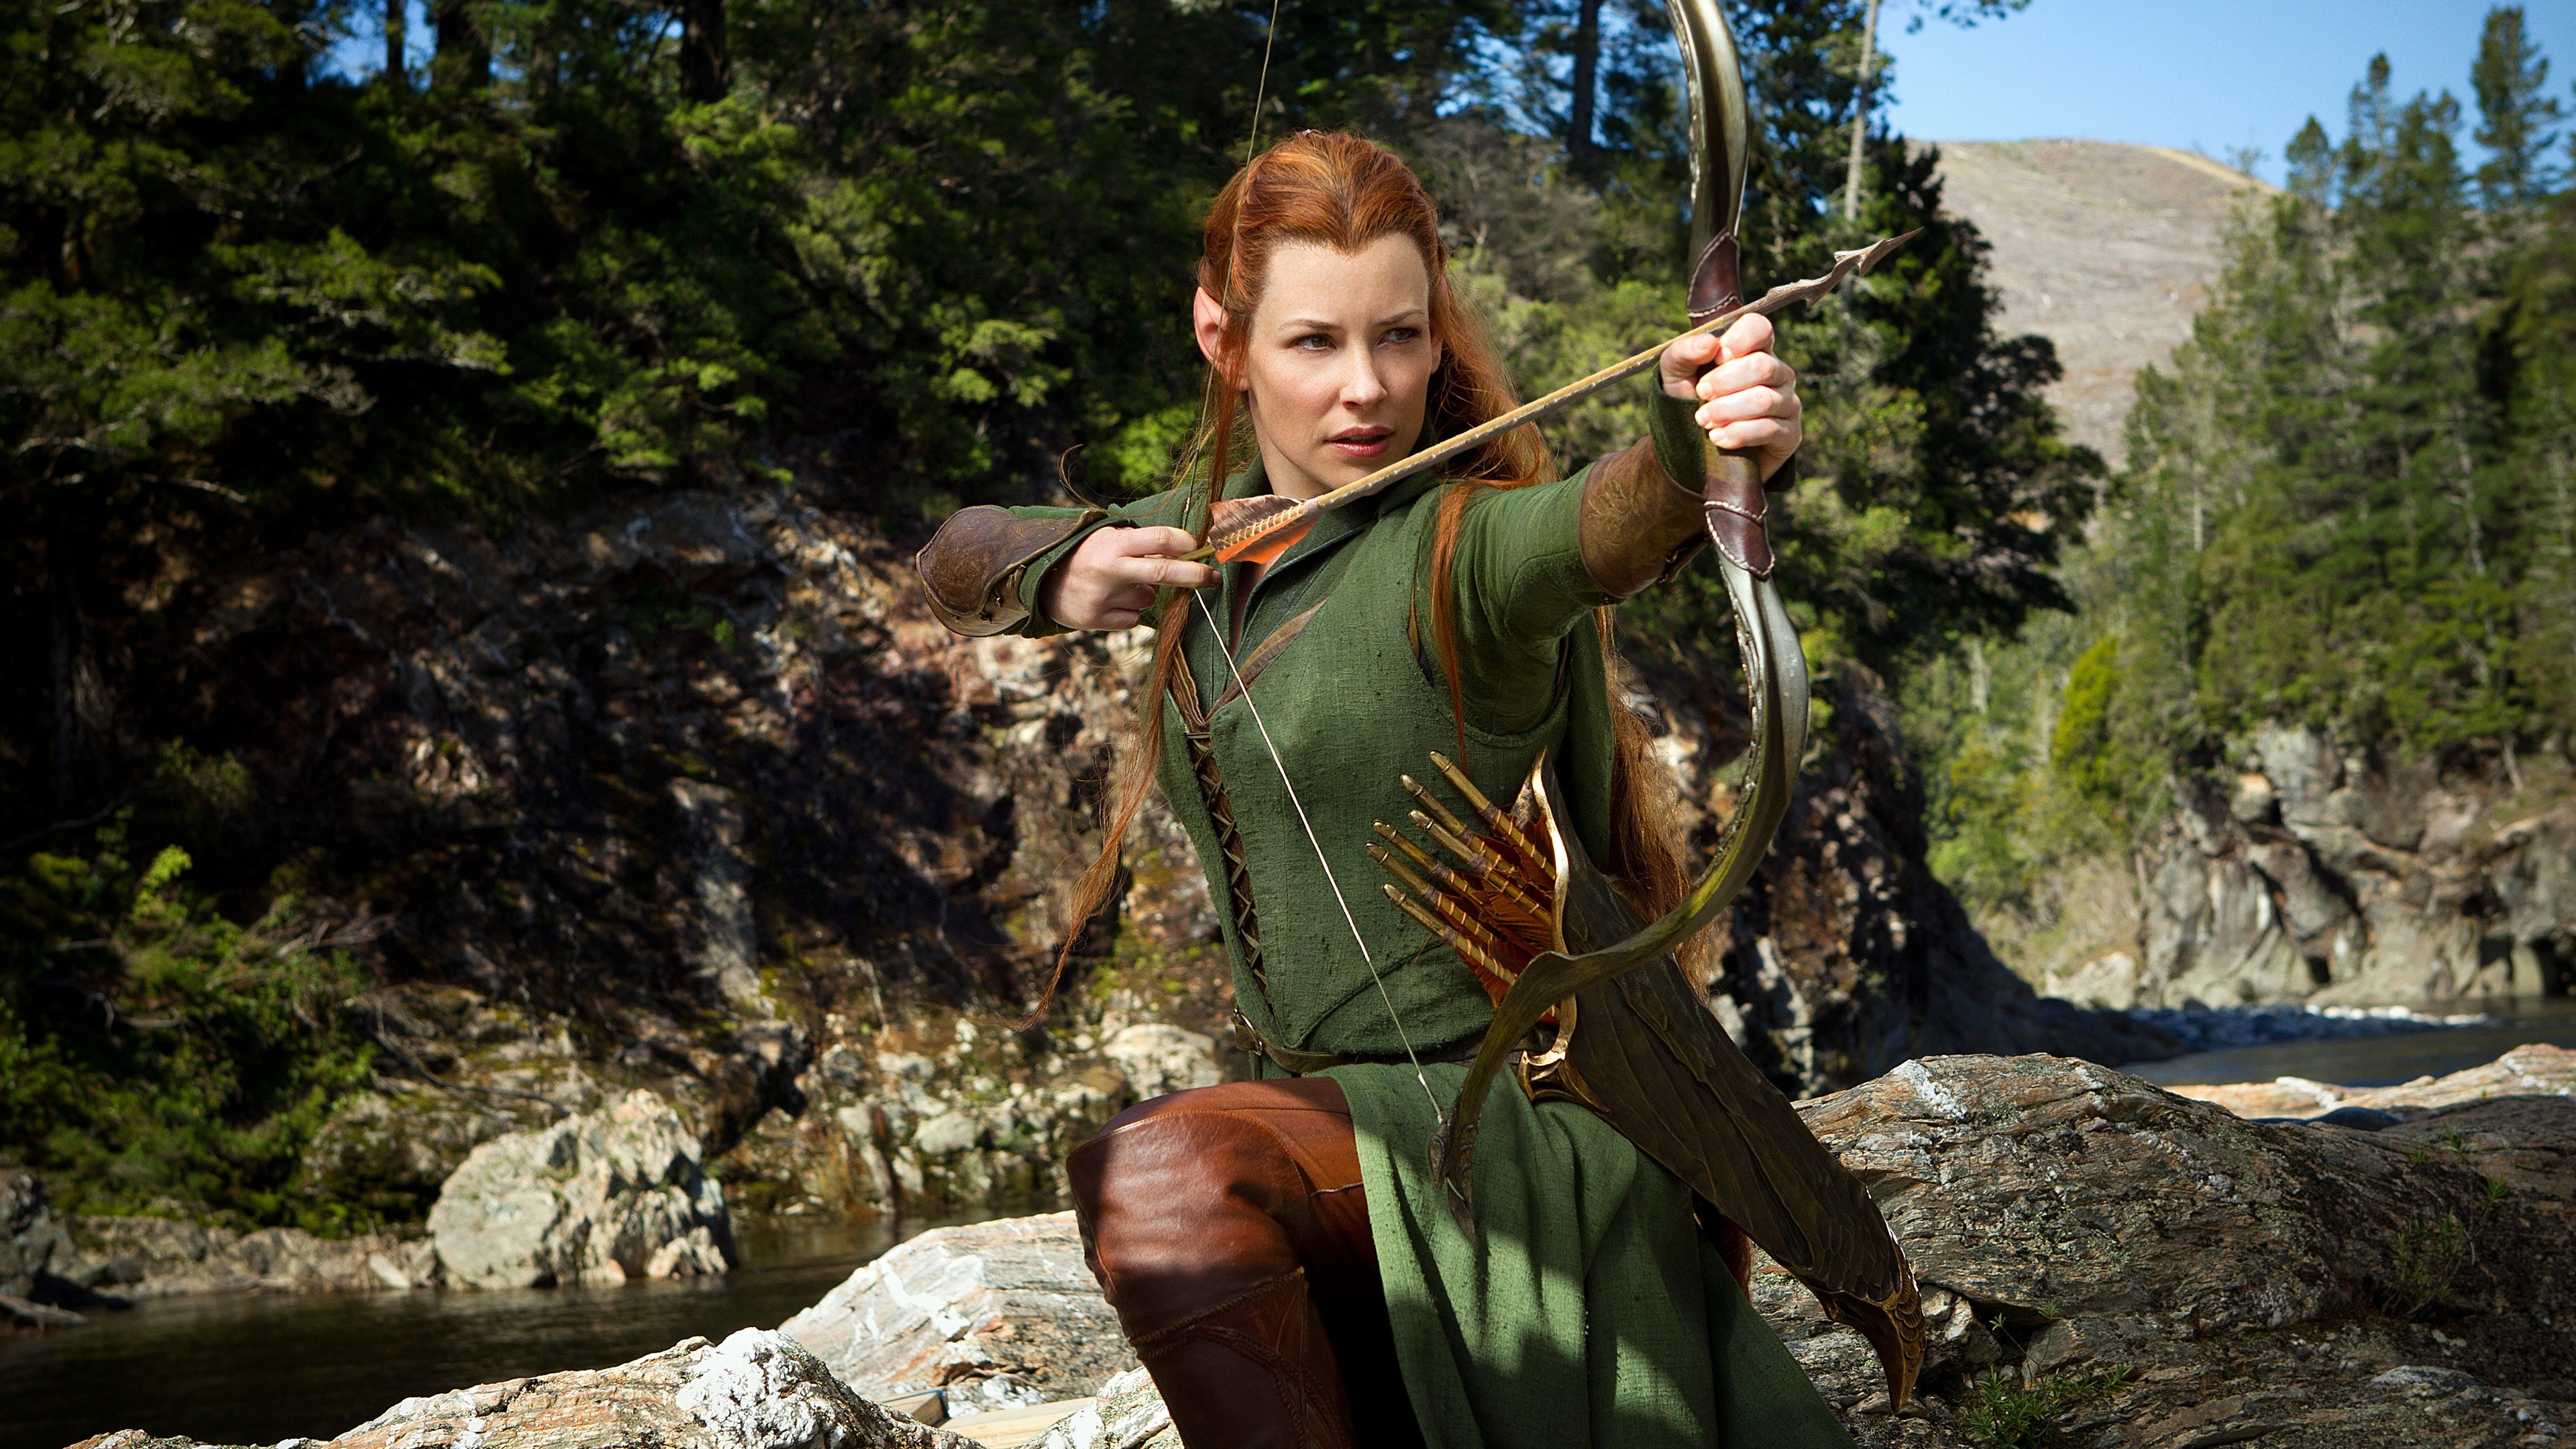 People 3840x2160 The Hobbit Tauriel Evangeline Lilly redhead archer archery girls with guns movies bow and arrow fantasy girl pointy ears actress women aiming film stills